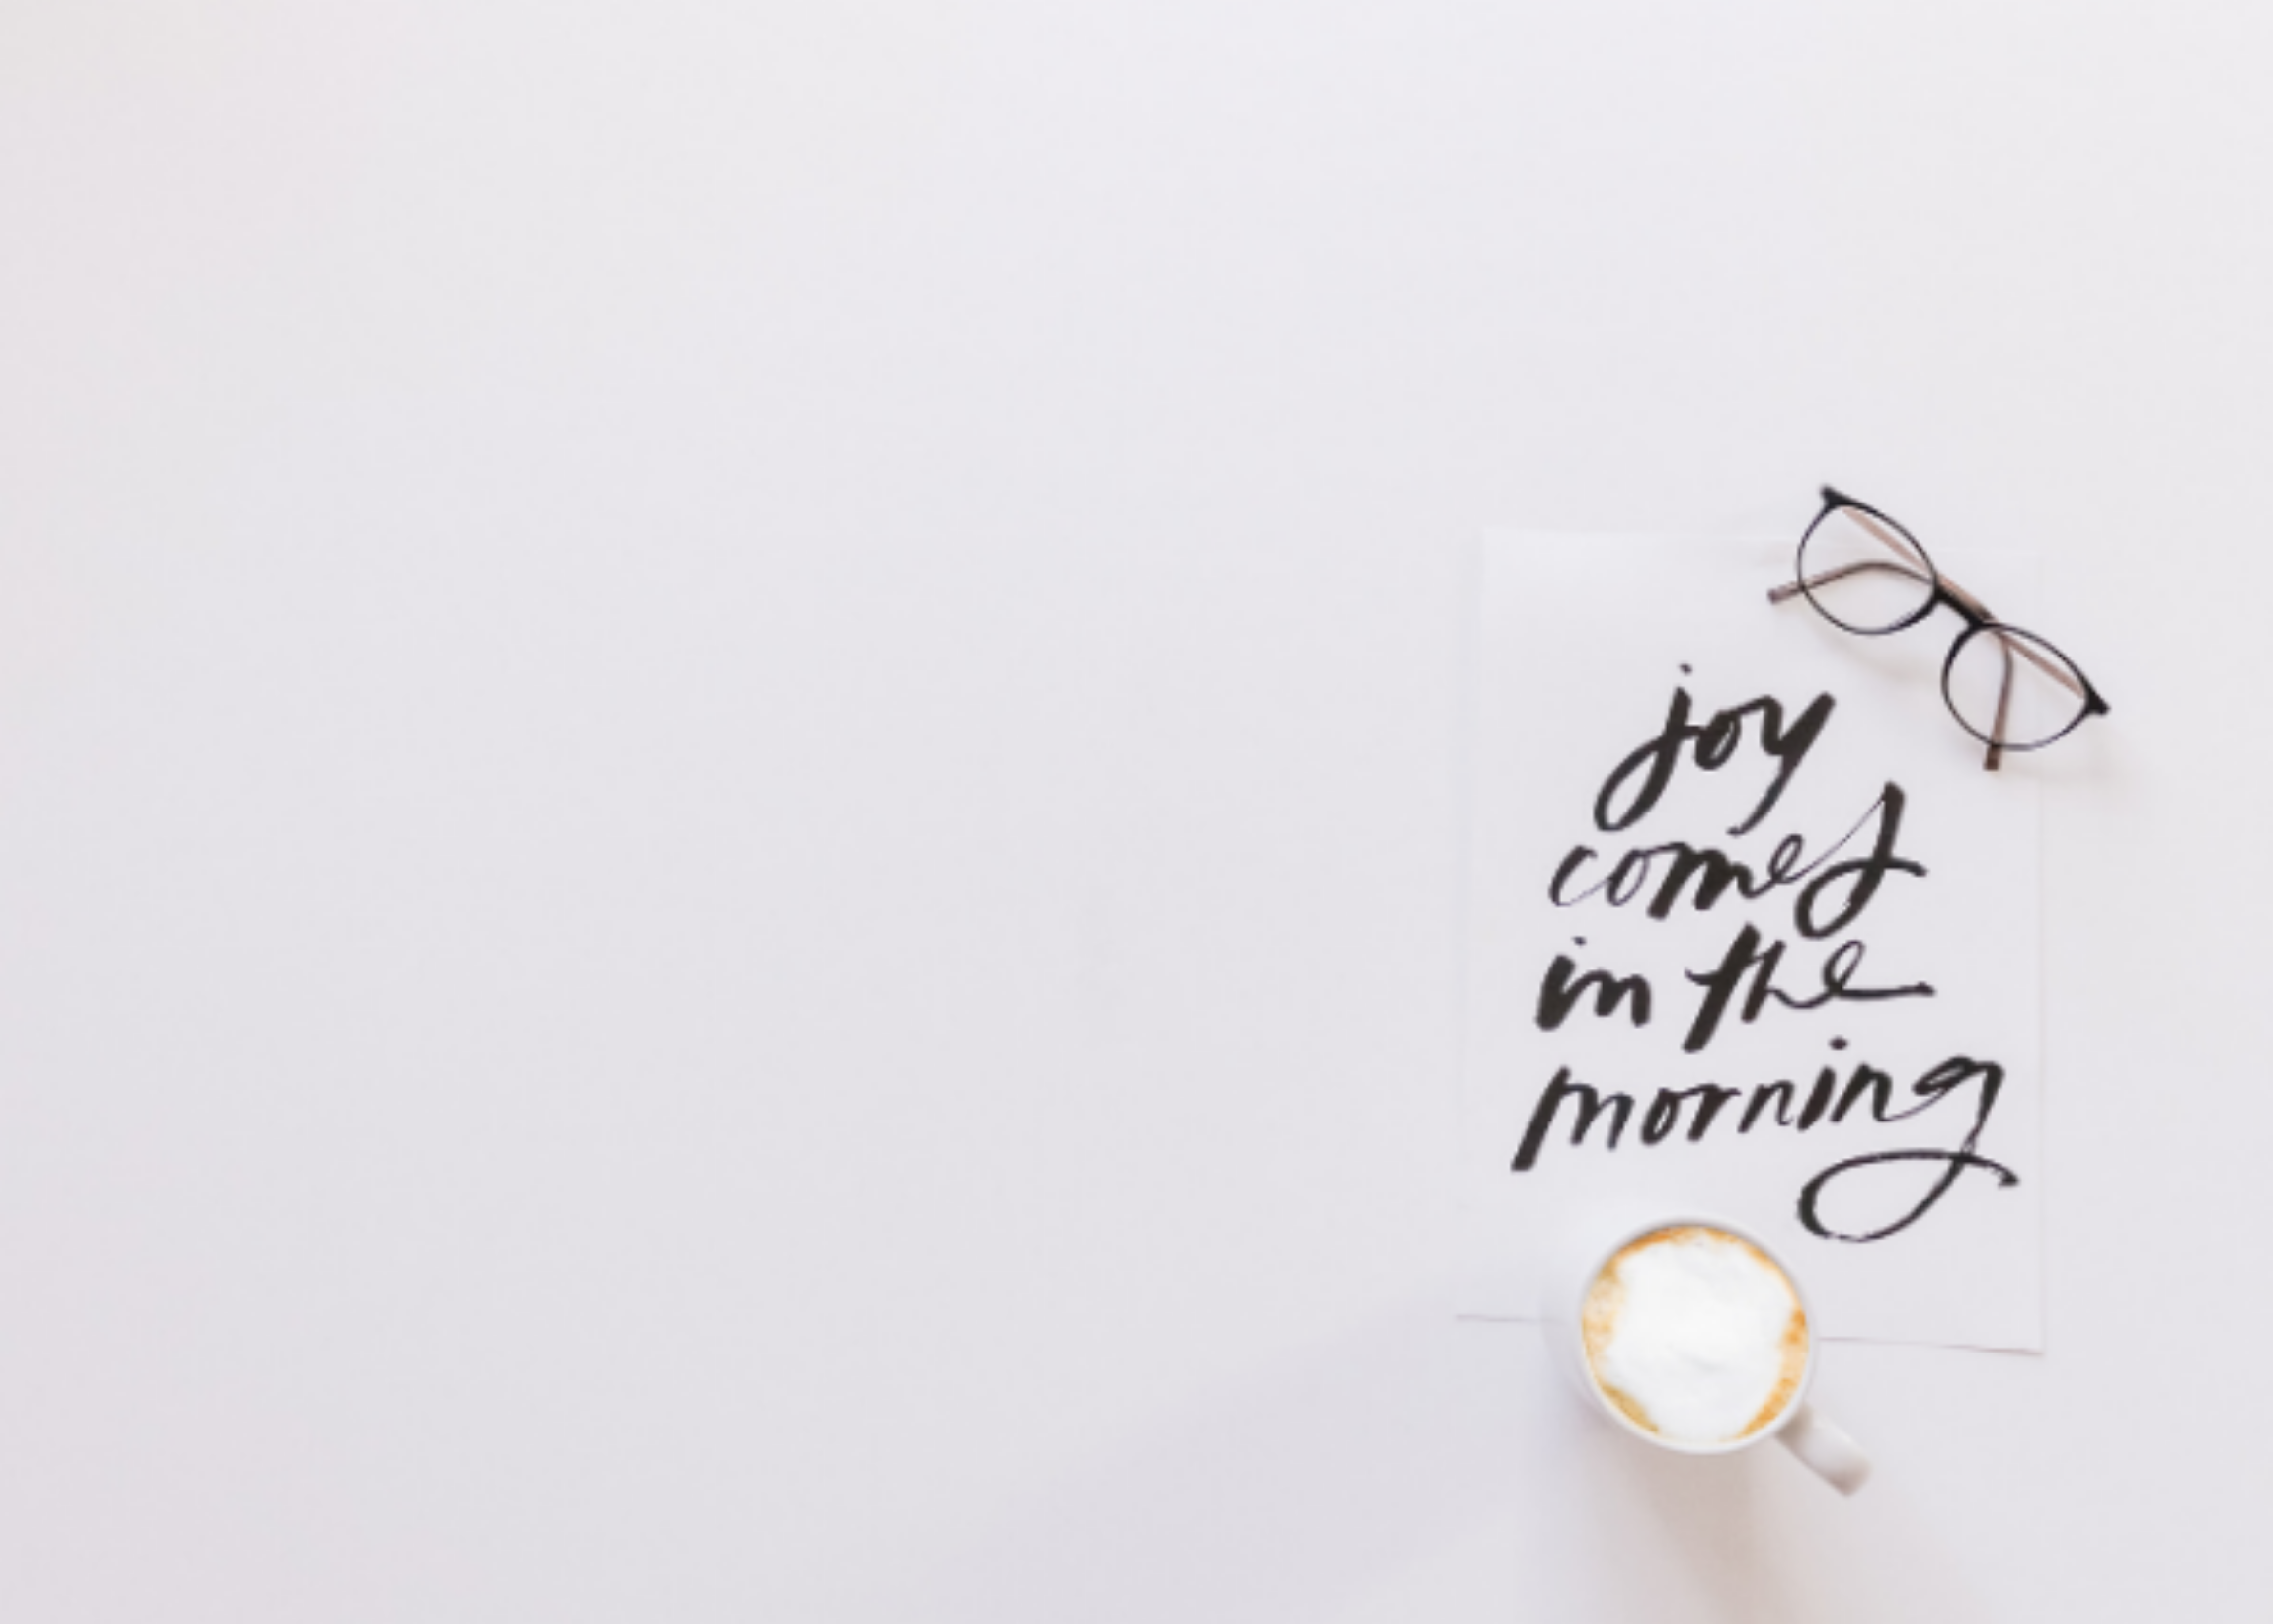 5 Tips to Starting and Keeping A Morning Routine